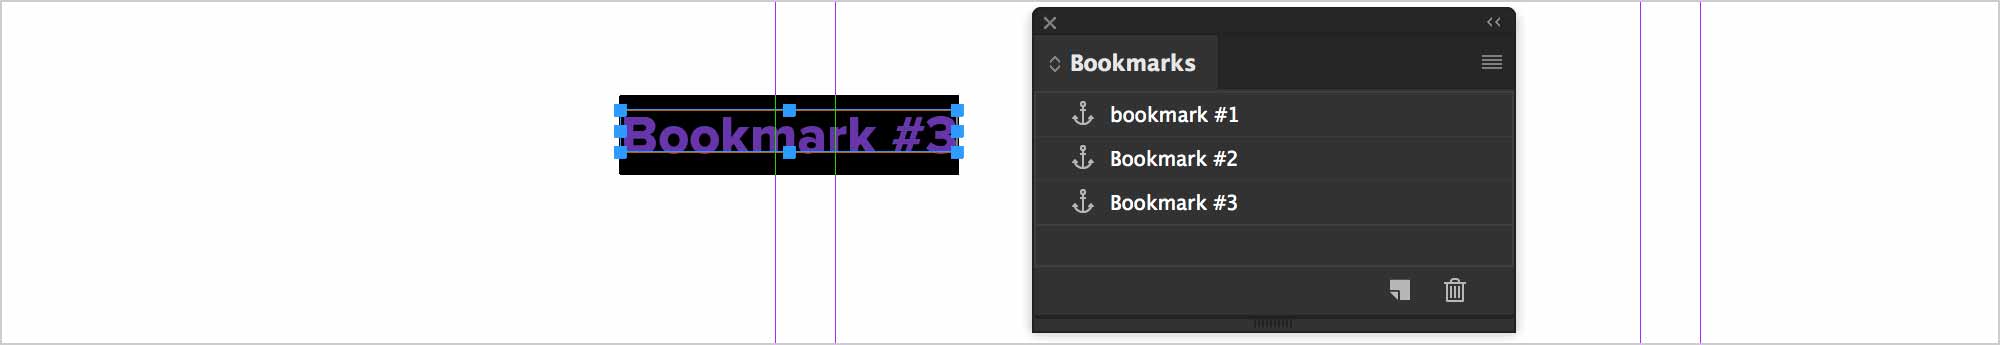 indesign-bookmarks-exercise